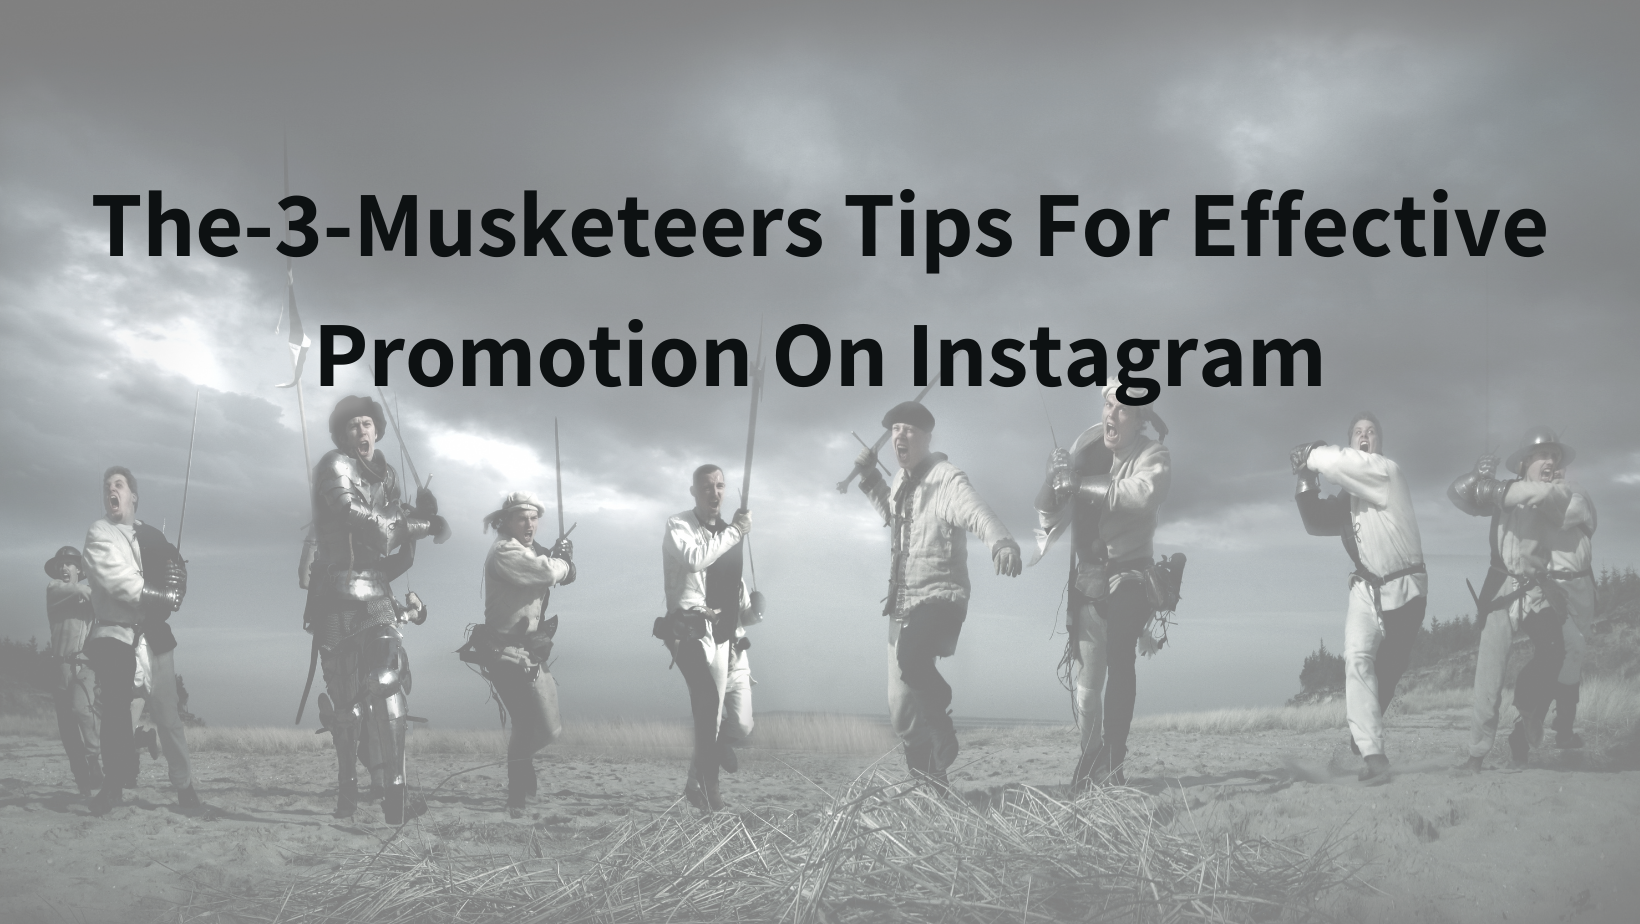 The-3-Musketeers Tips For Effective Promotion On Instagram